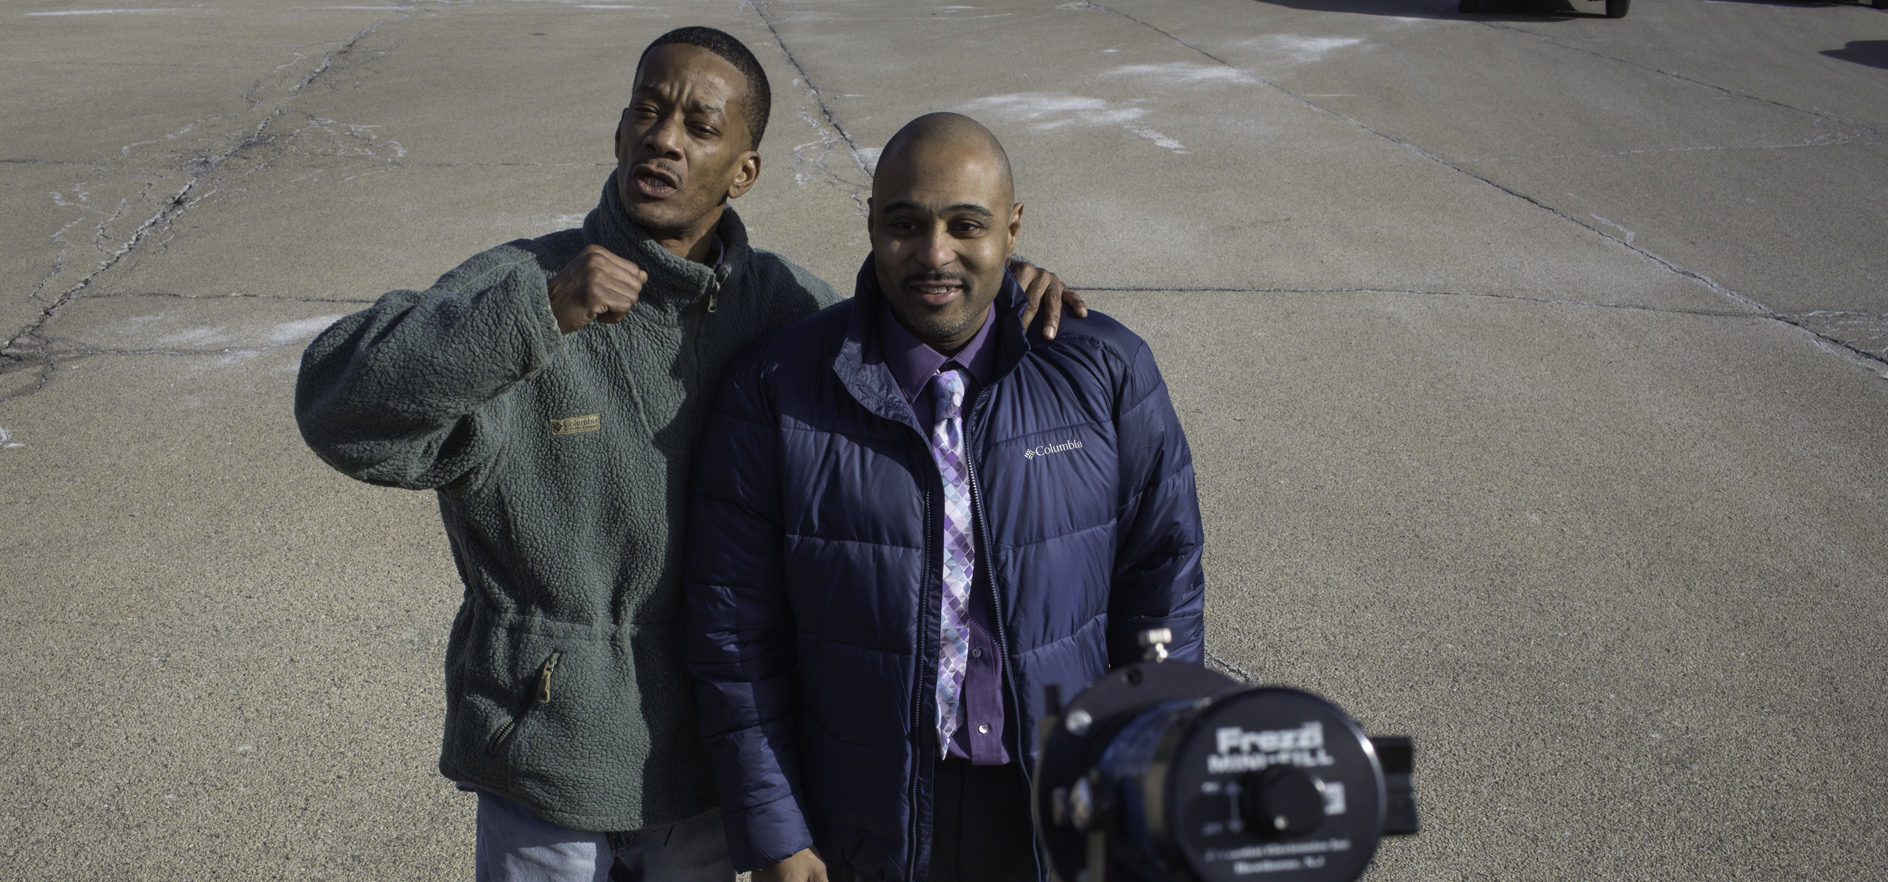 Two Chicago Men Exonerated Based on DNA and Coerced False Confession During Burge Era